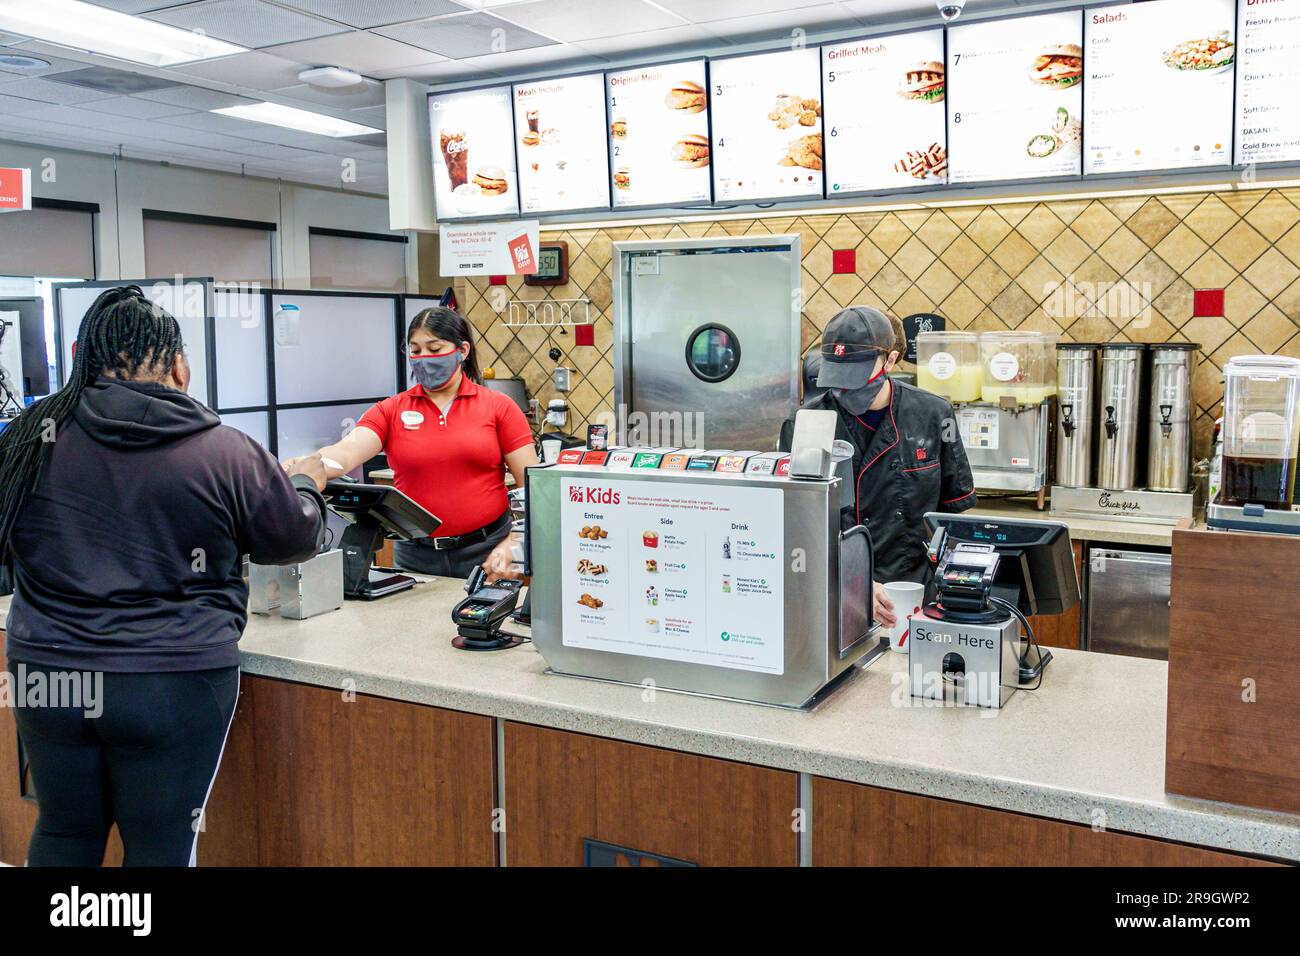 Macon Georgia,Chick-fil-A fast food restaurant,inside counter women employees customer,inside interior indoors Stock Photo